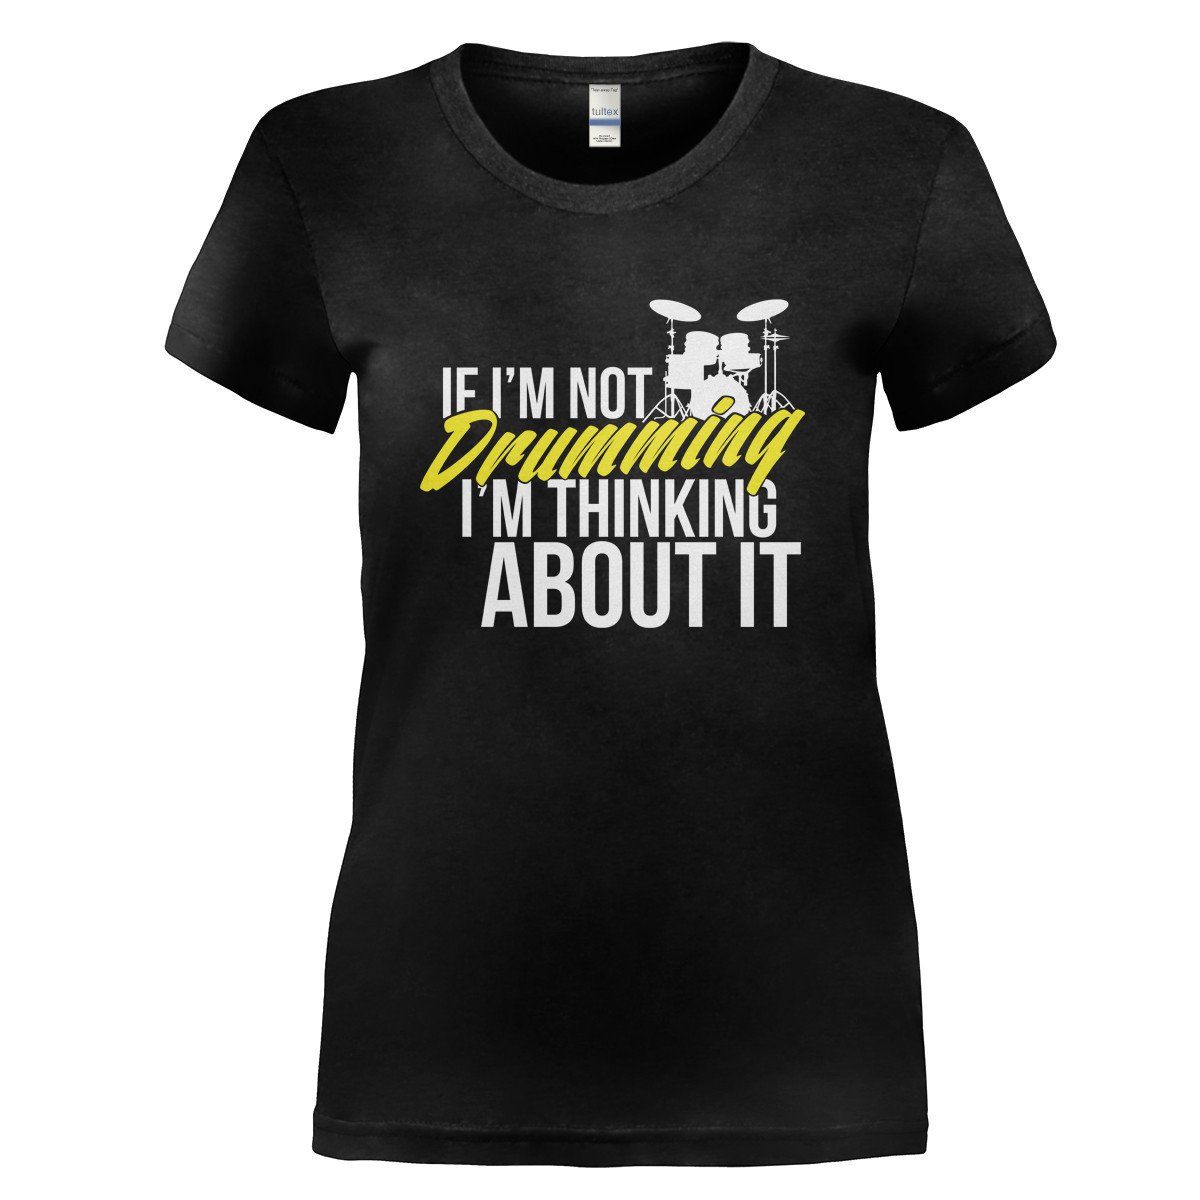 If Not Drumming I'm Thinking About It T-Shirt & Hoodie - I Love Apparel